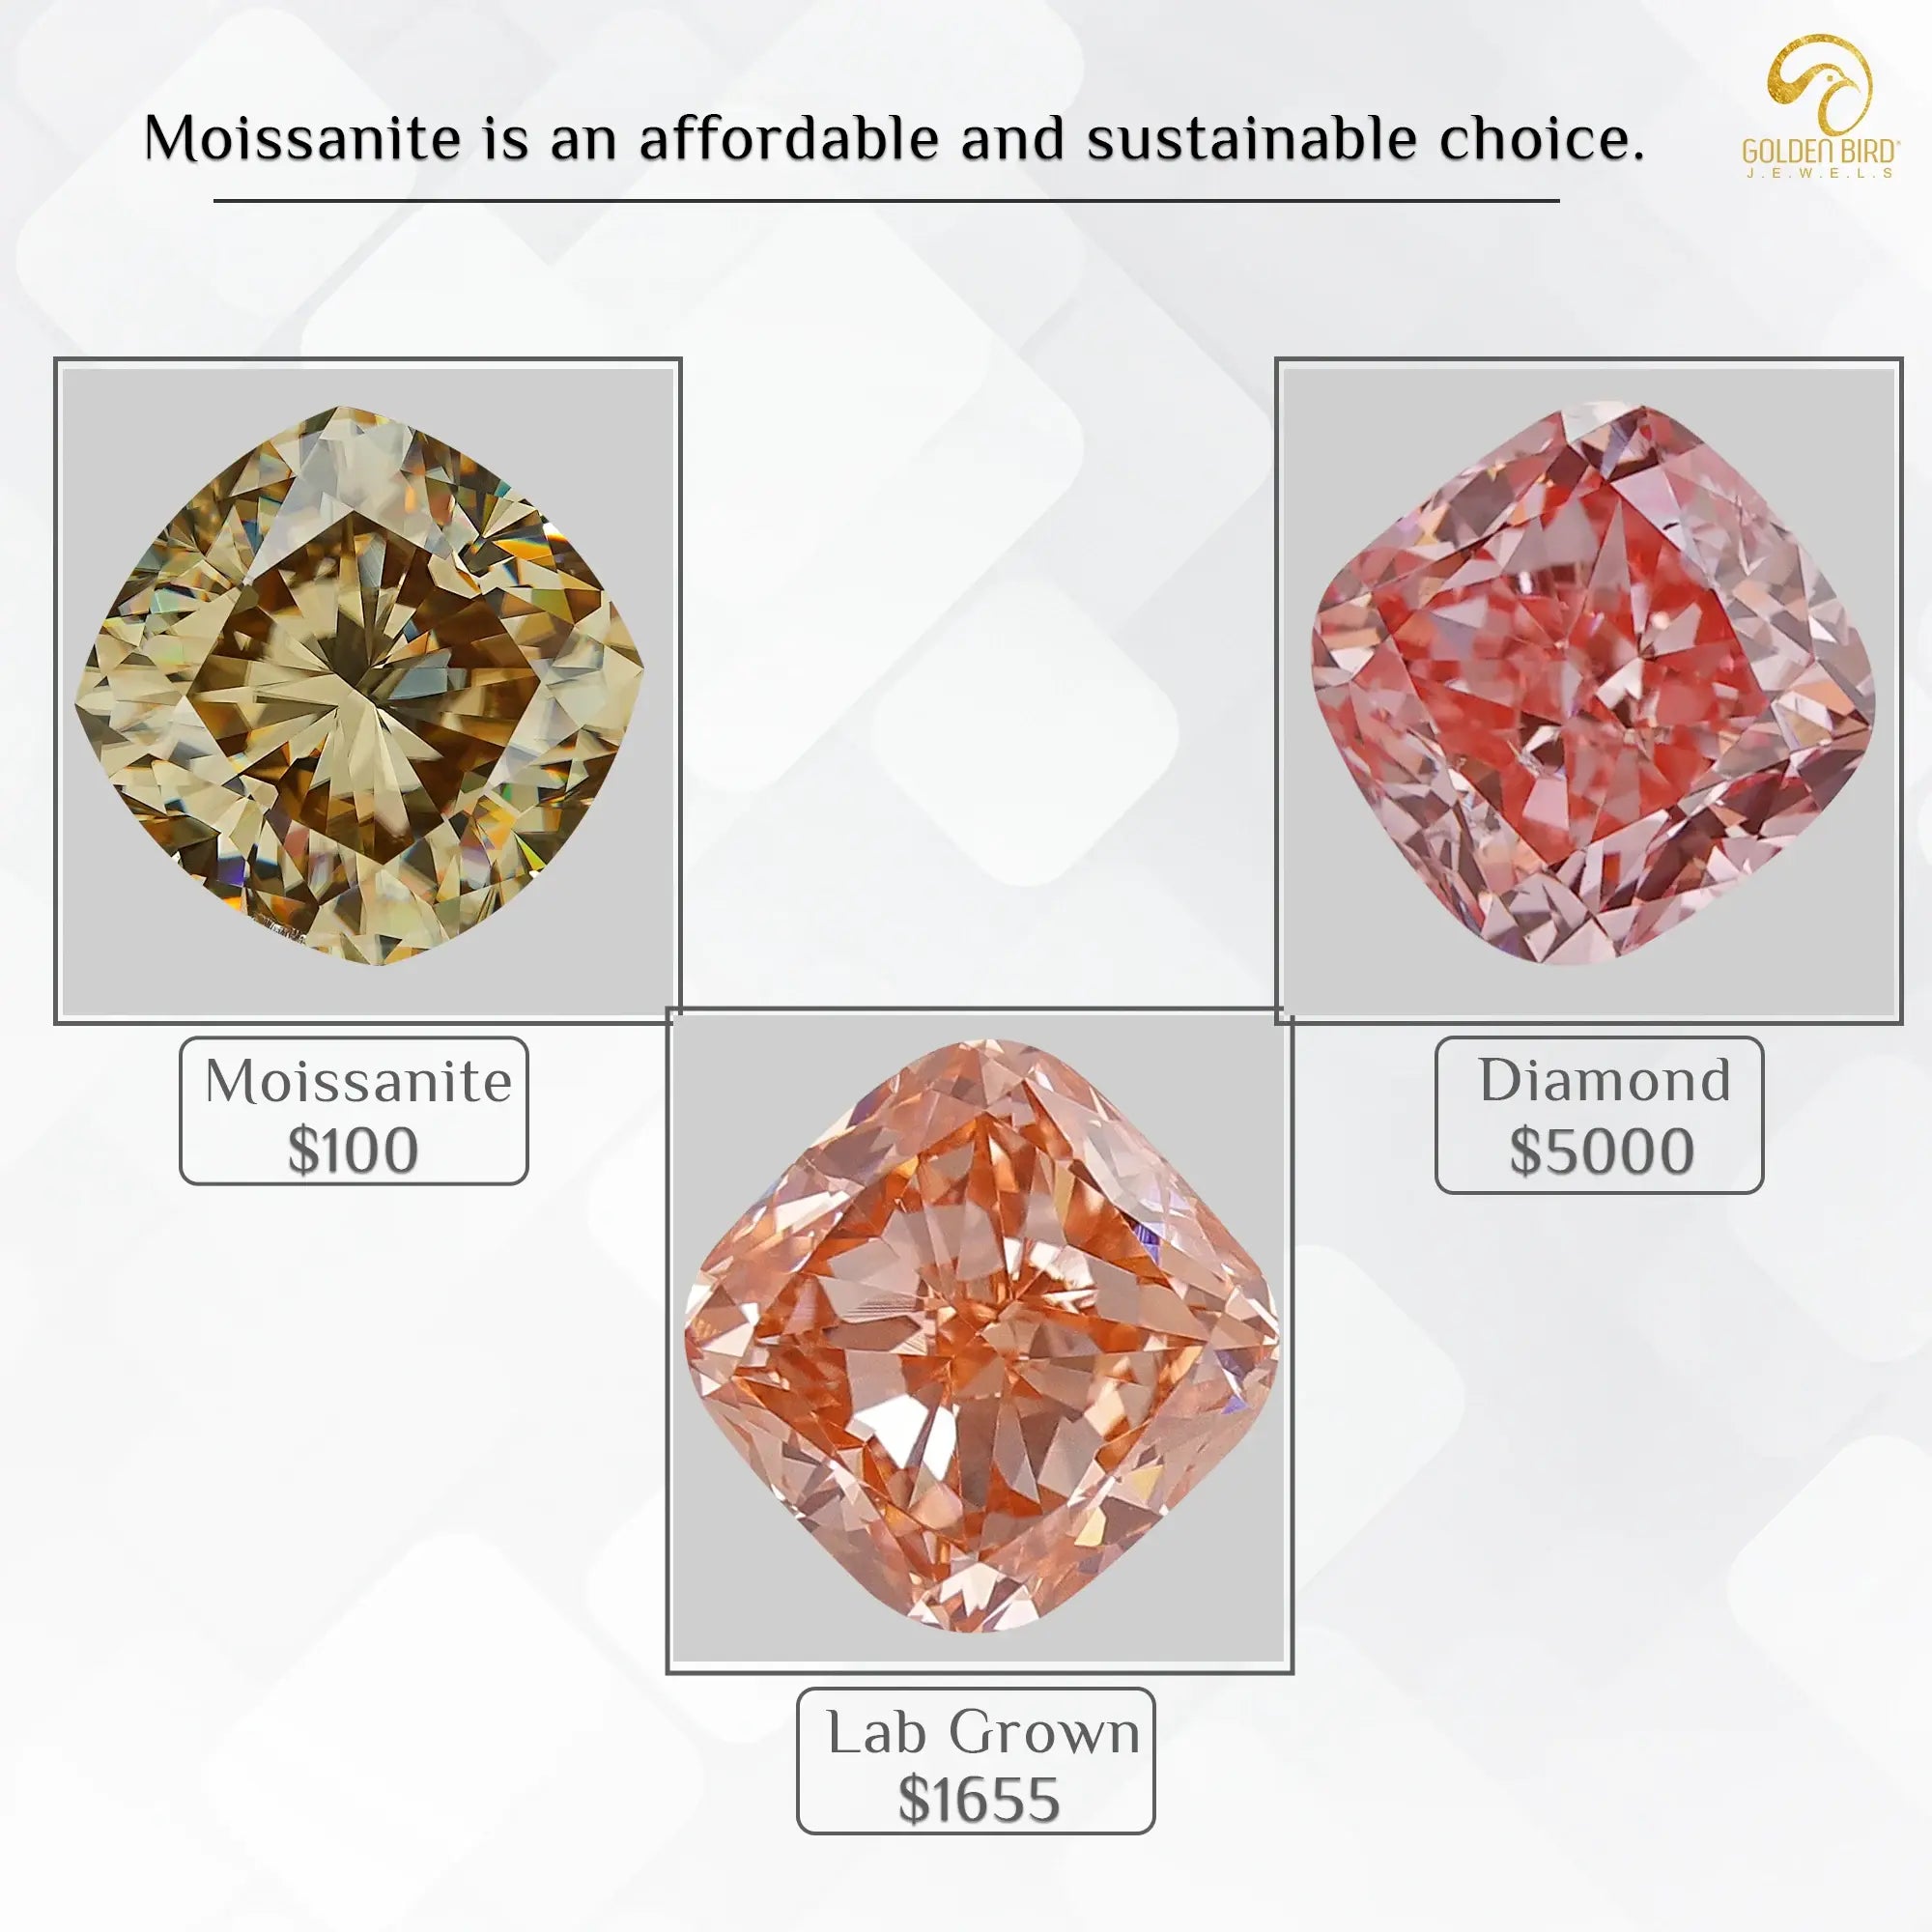 Moissanite, lab-grown diamond and natural diamond price comparison to determine which is price freindly